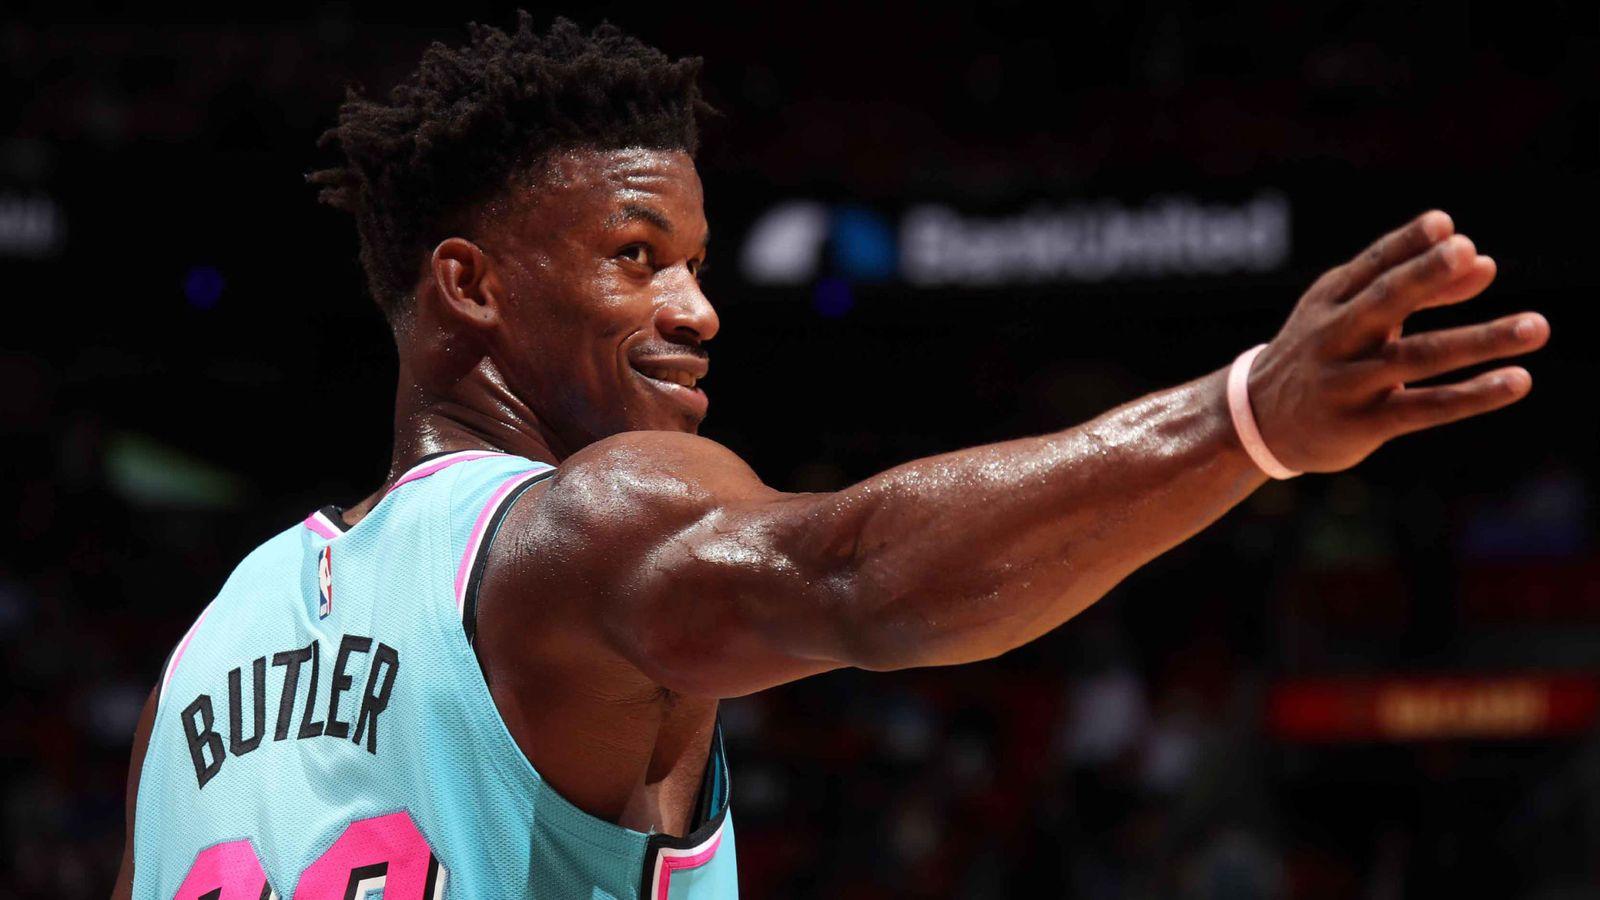 Jimmy Butler says Miami Heat wins more important than his triple